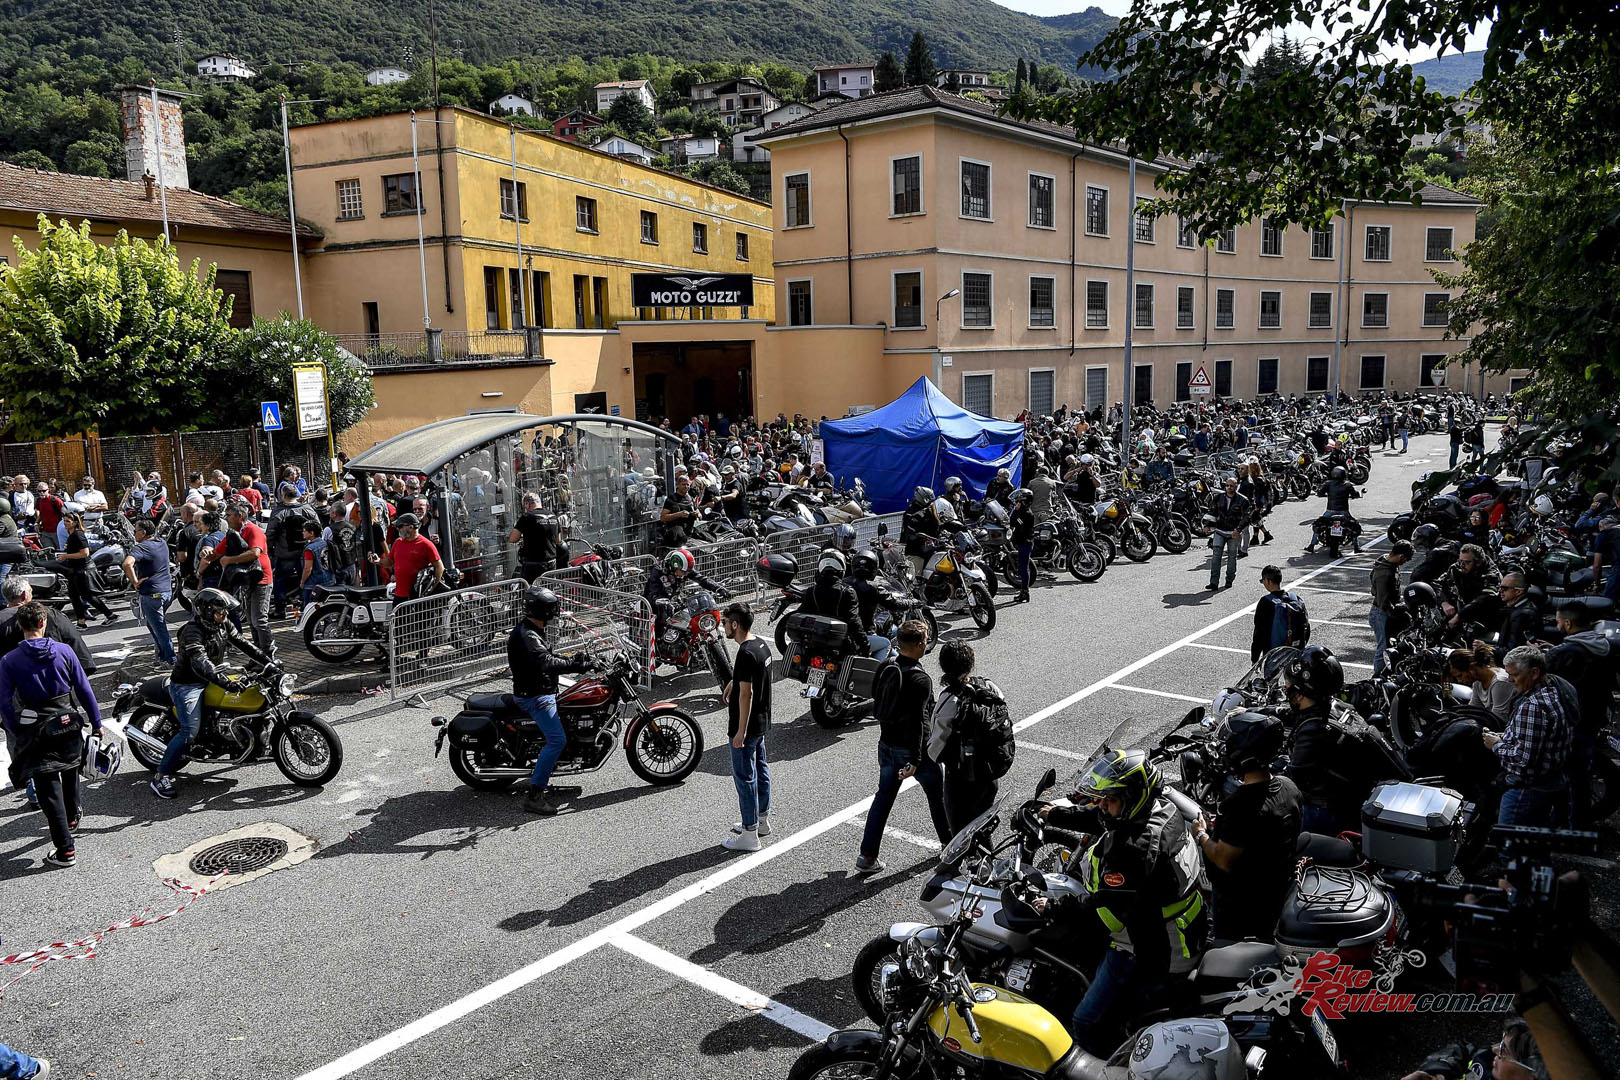 Together with the International Motorcycle Rally Committee, Moto Guzzi is preparing a festival that deserves the title “not to be missed” like never before.